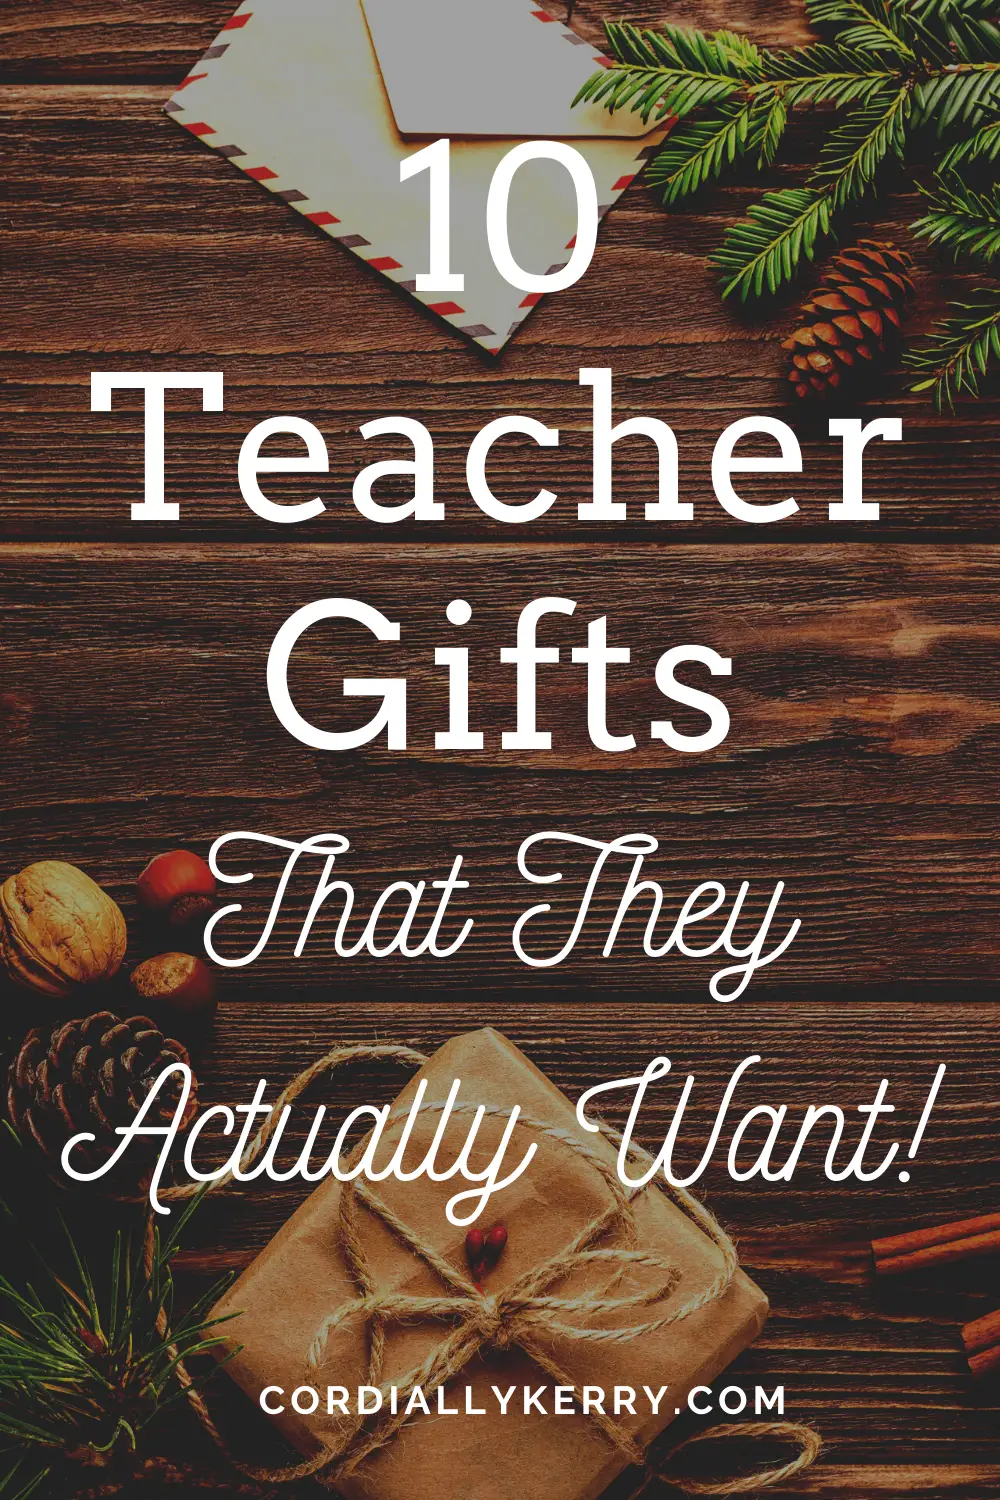 Best teacher gifts to celebrate the end of term | The Independent